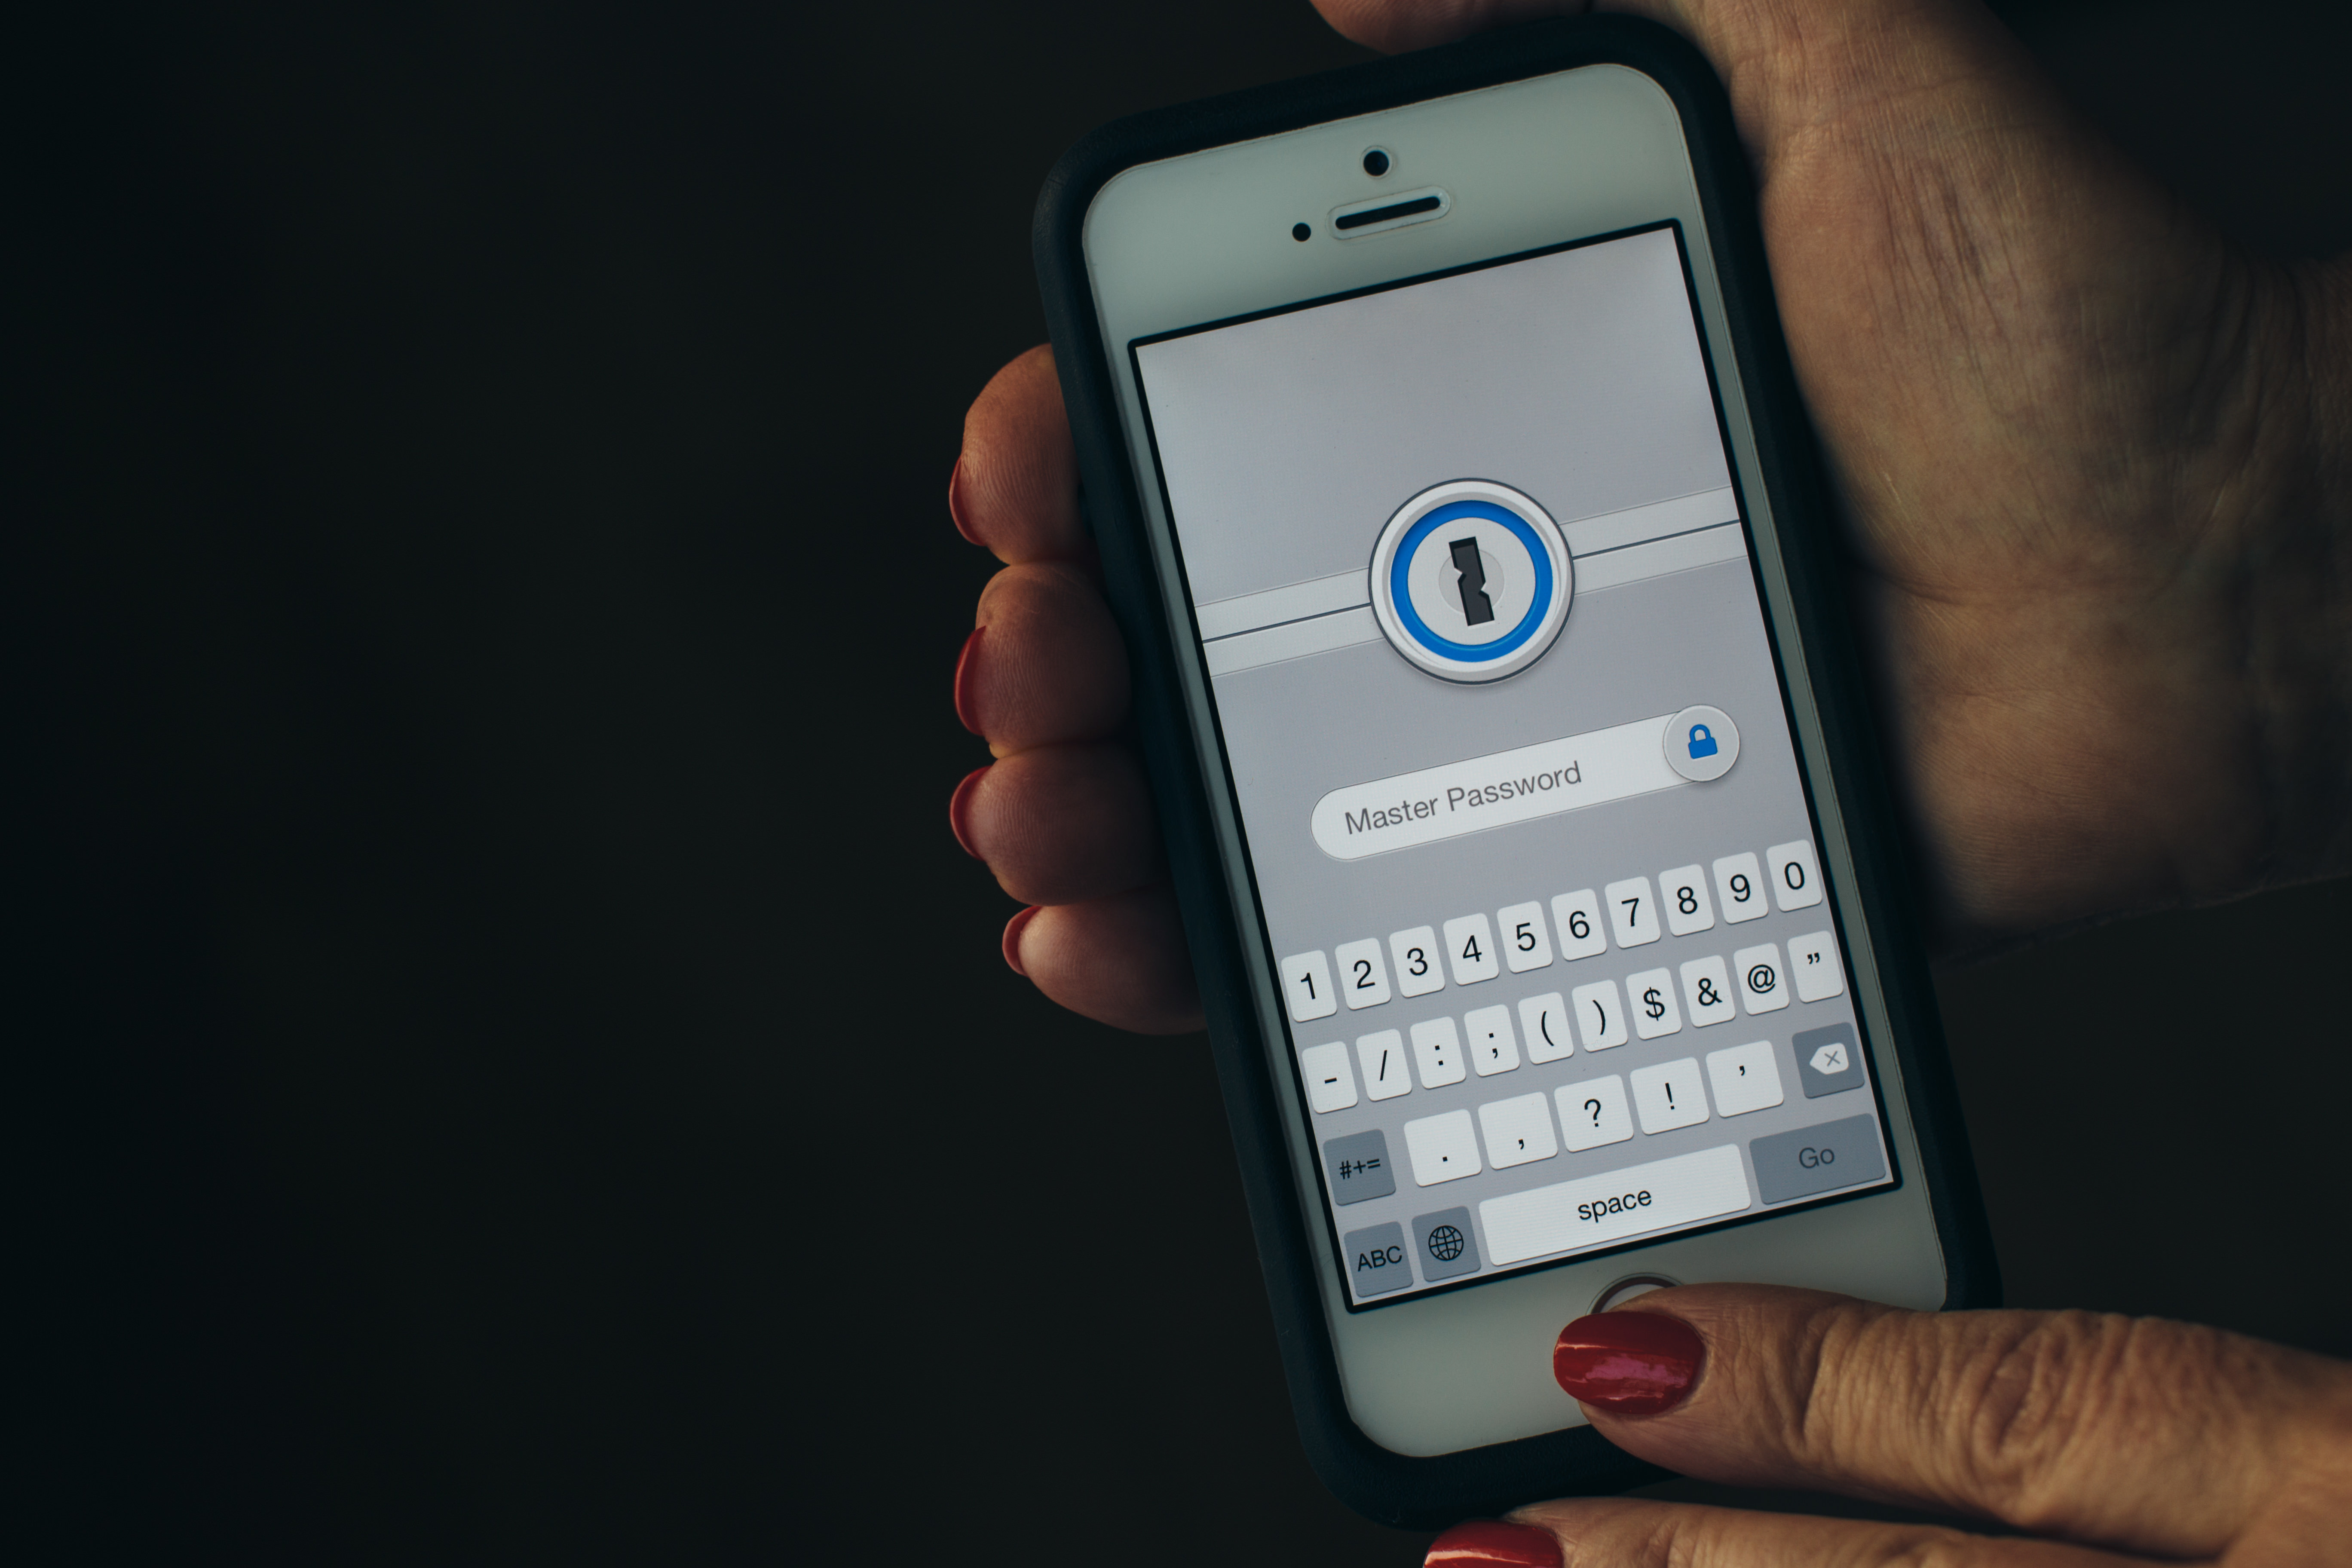 1Password remembers all your passwords, but requires you to remember only one.